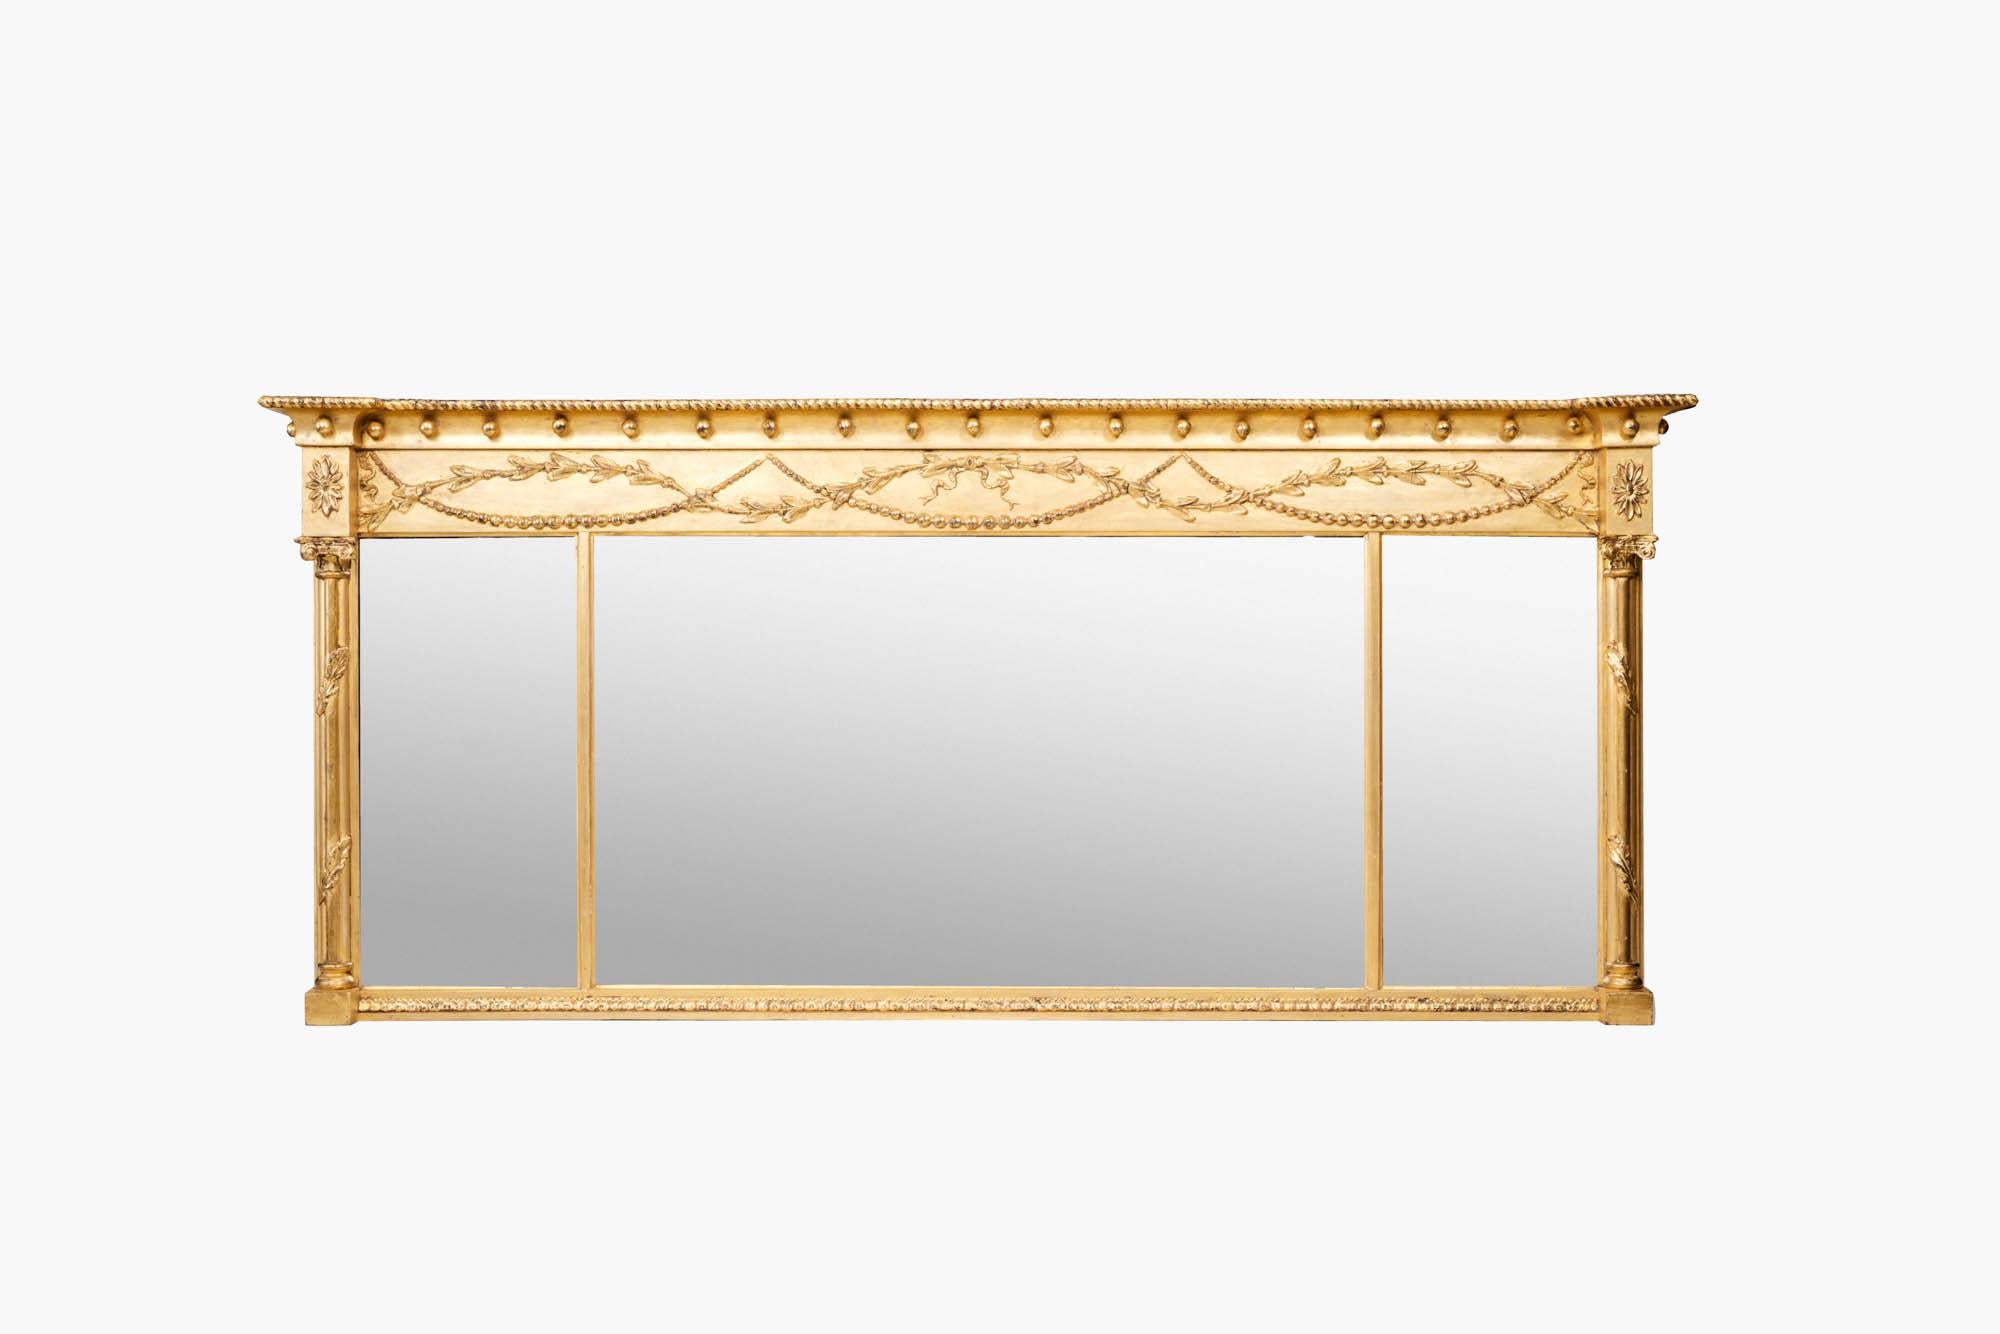 19th Century Regency Gilt Compartmental Overmantel Mirror In Excellent Condition For Sale In Dublin 8, IE